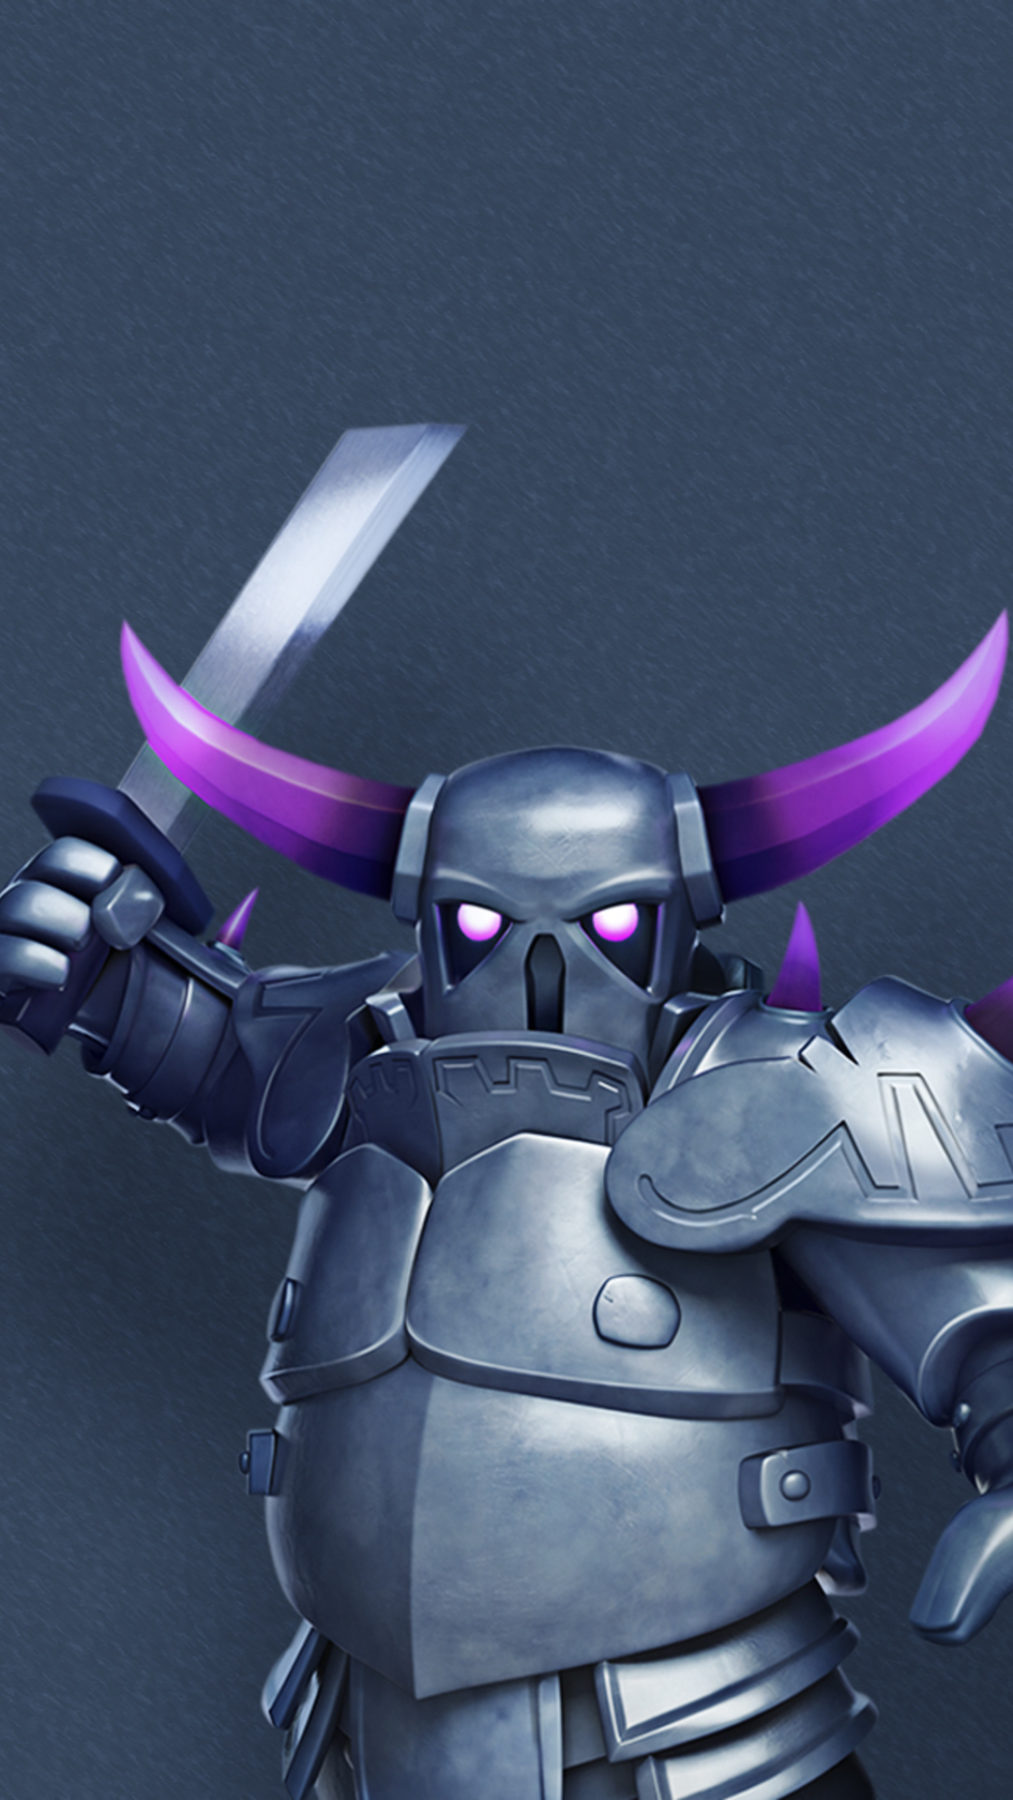 Clash Of Clans Wallpapers Iphone X - Hd Clash Of Clans Pekka - 1013x1800  Wallpaper 